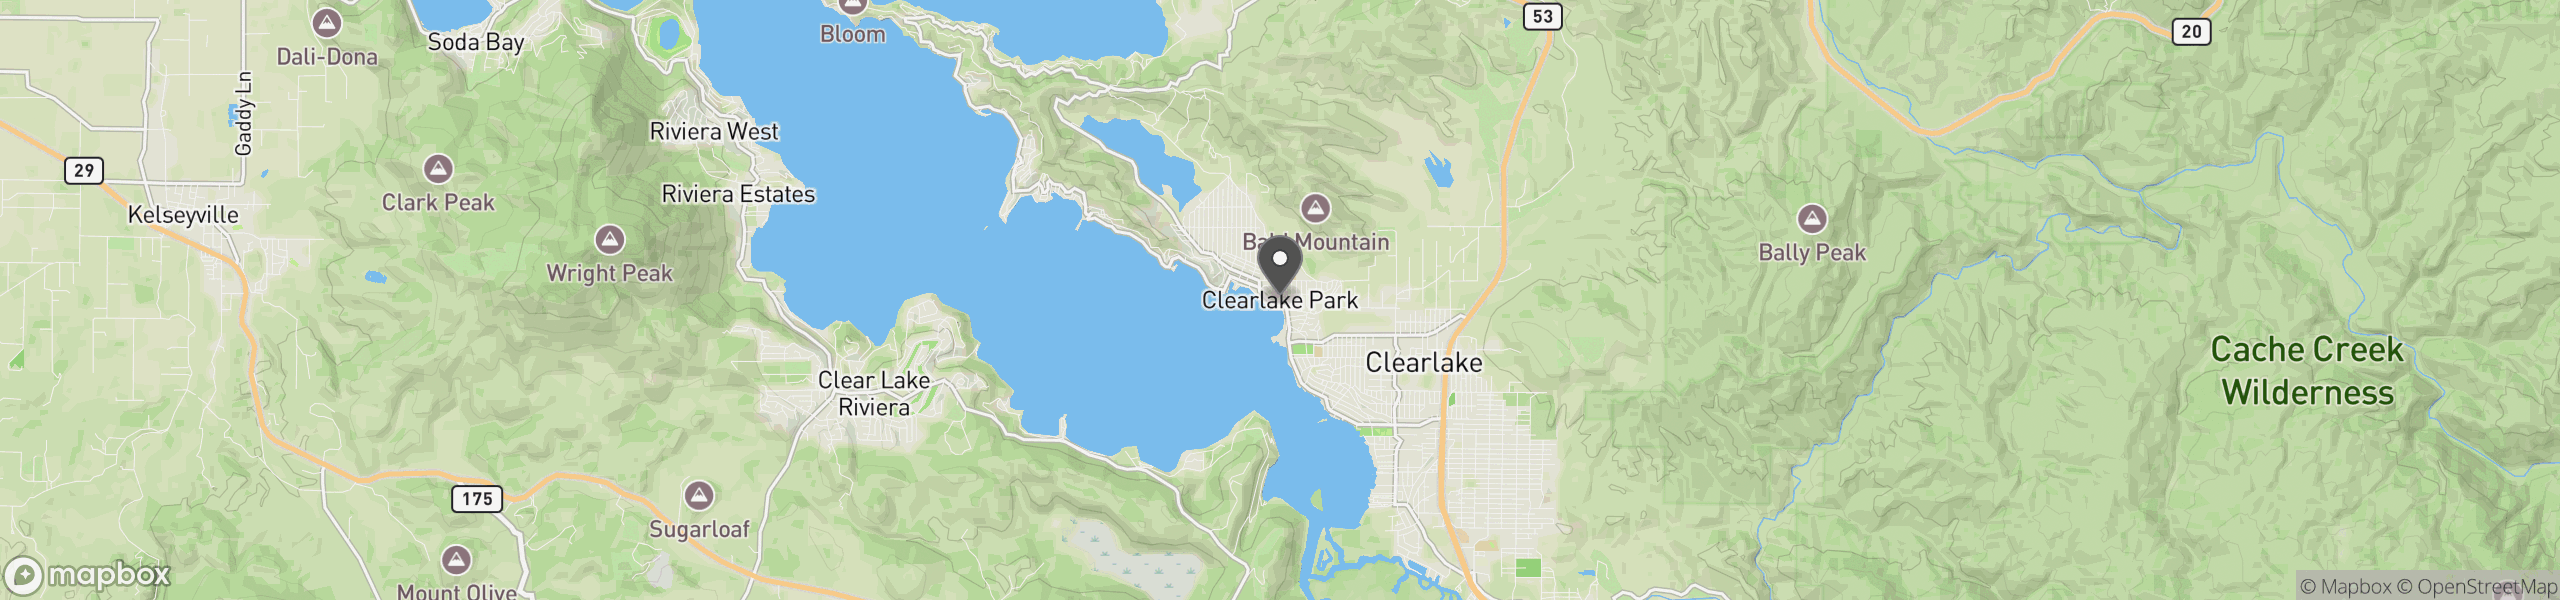 Clearlake Park, CA